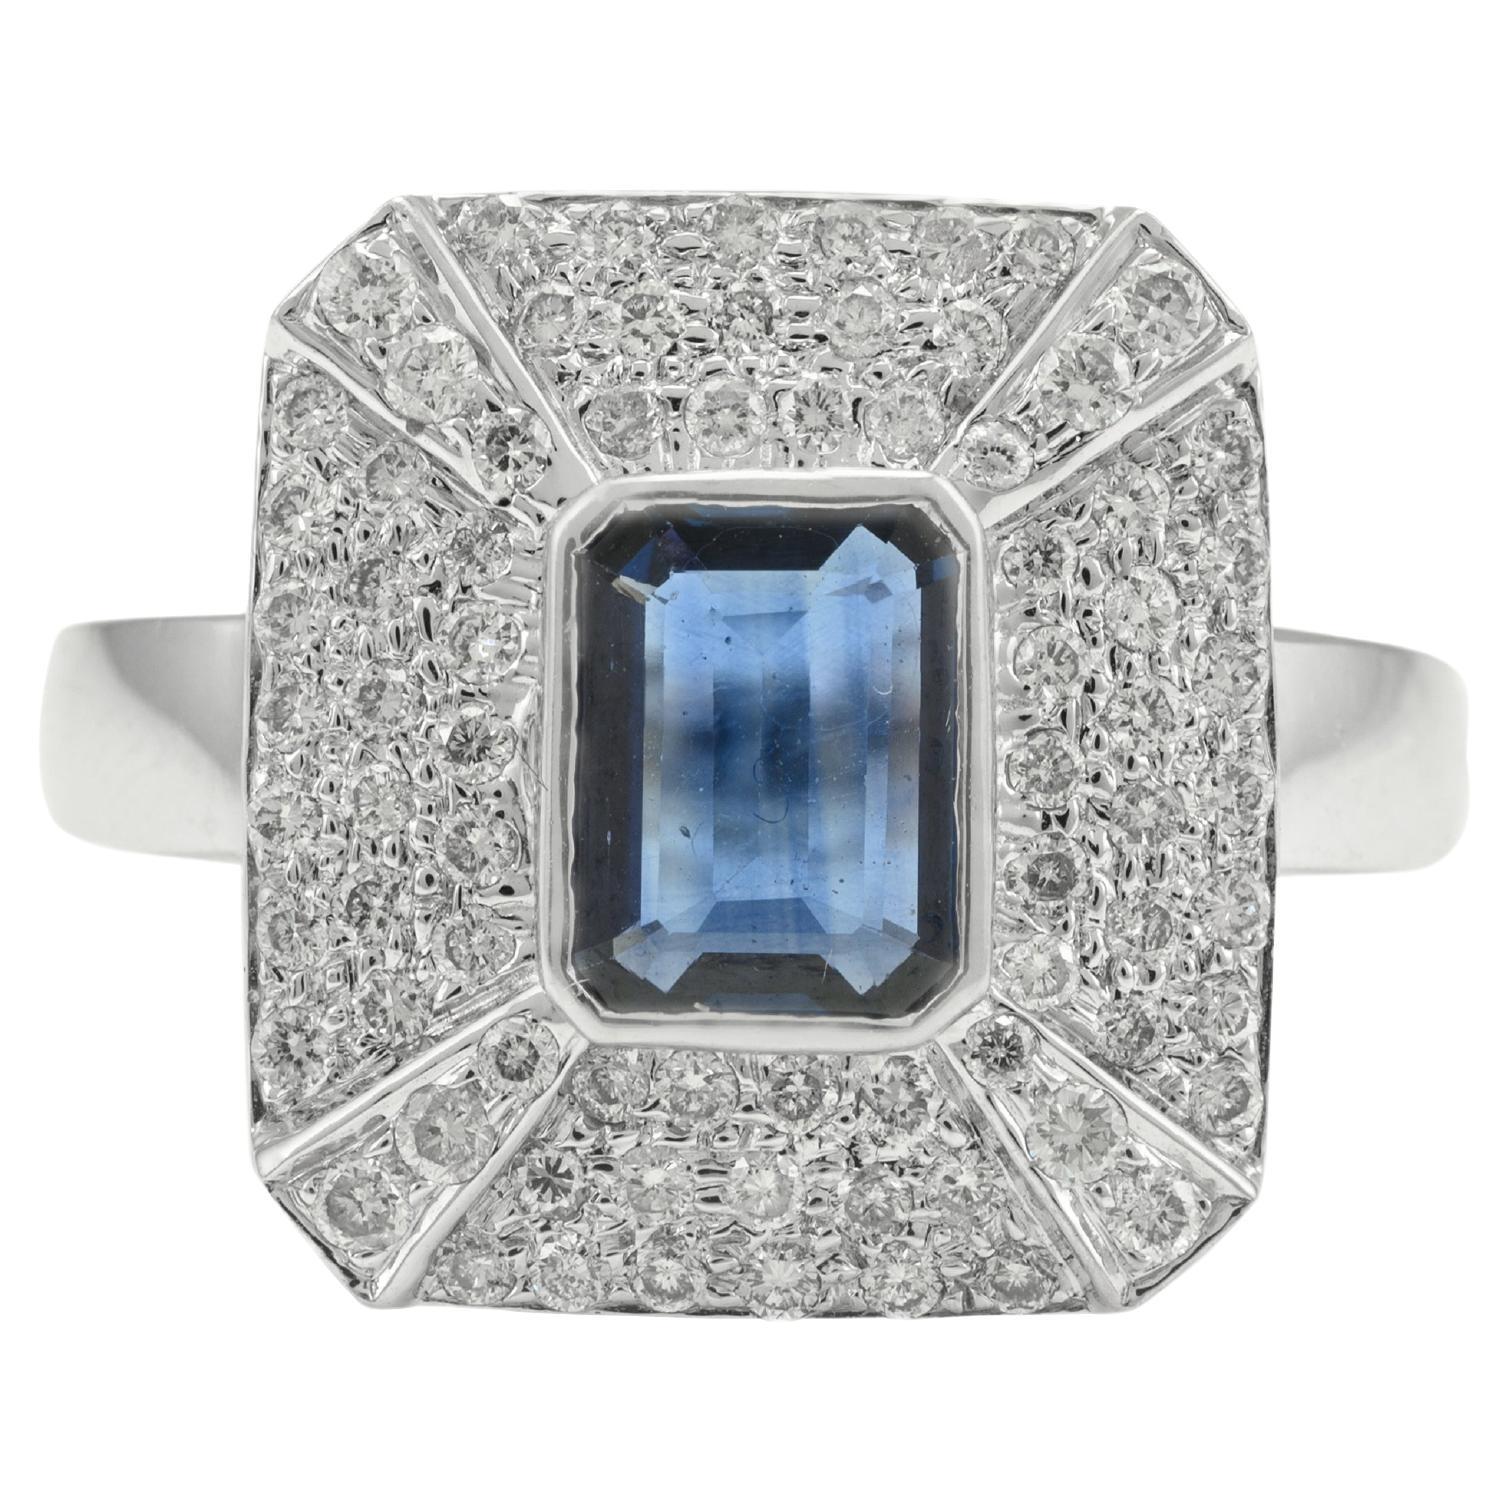 For Sale:  Exquisite Diamond and Emerald Cut Blue Sapphire Ring in 18k Solid White Gold